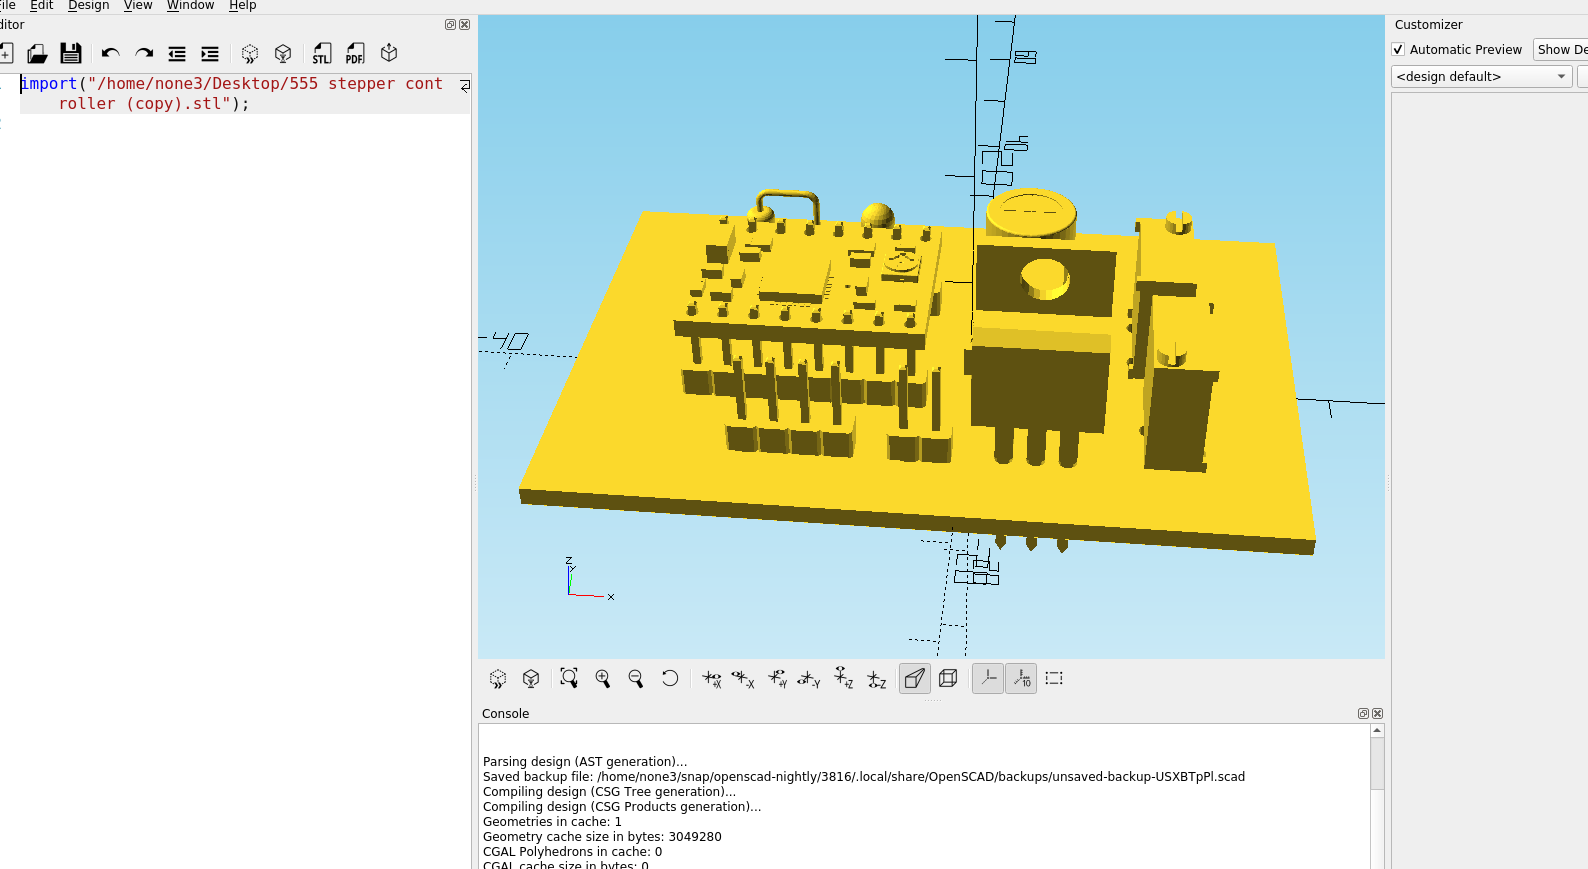 3d Part design #59: Easy way to make a 3d printable model of a circuit board.